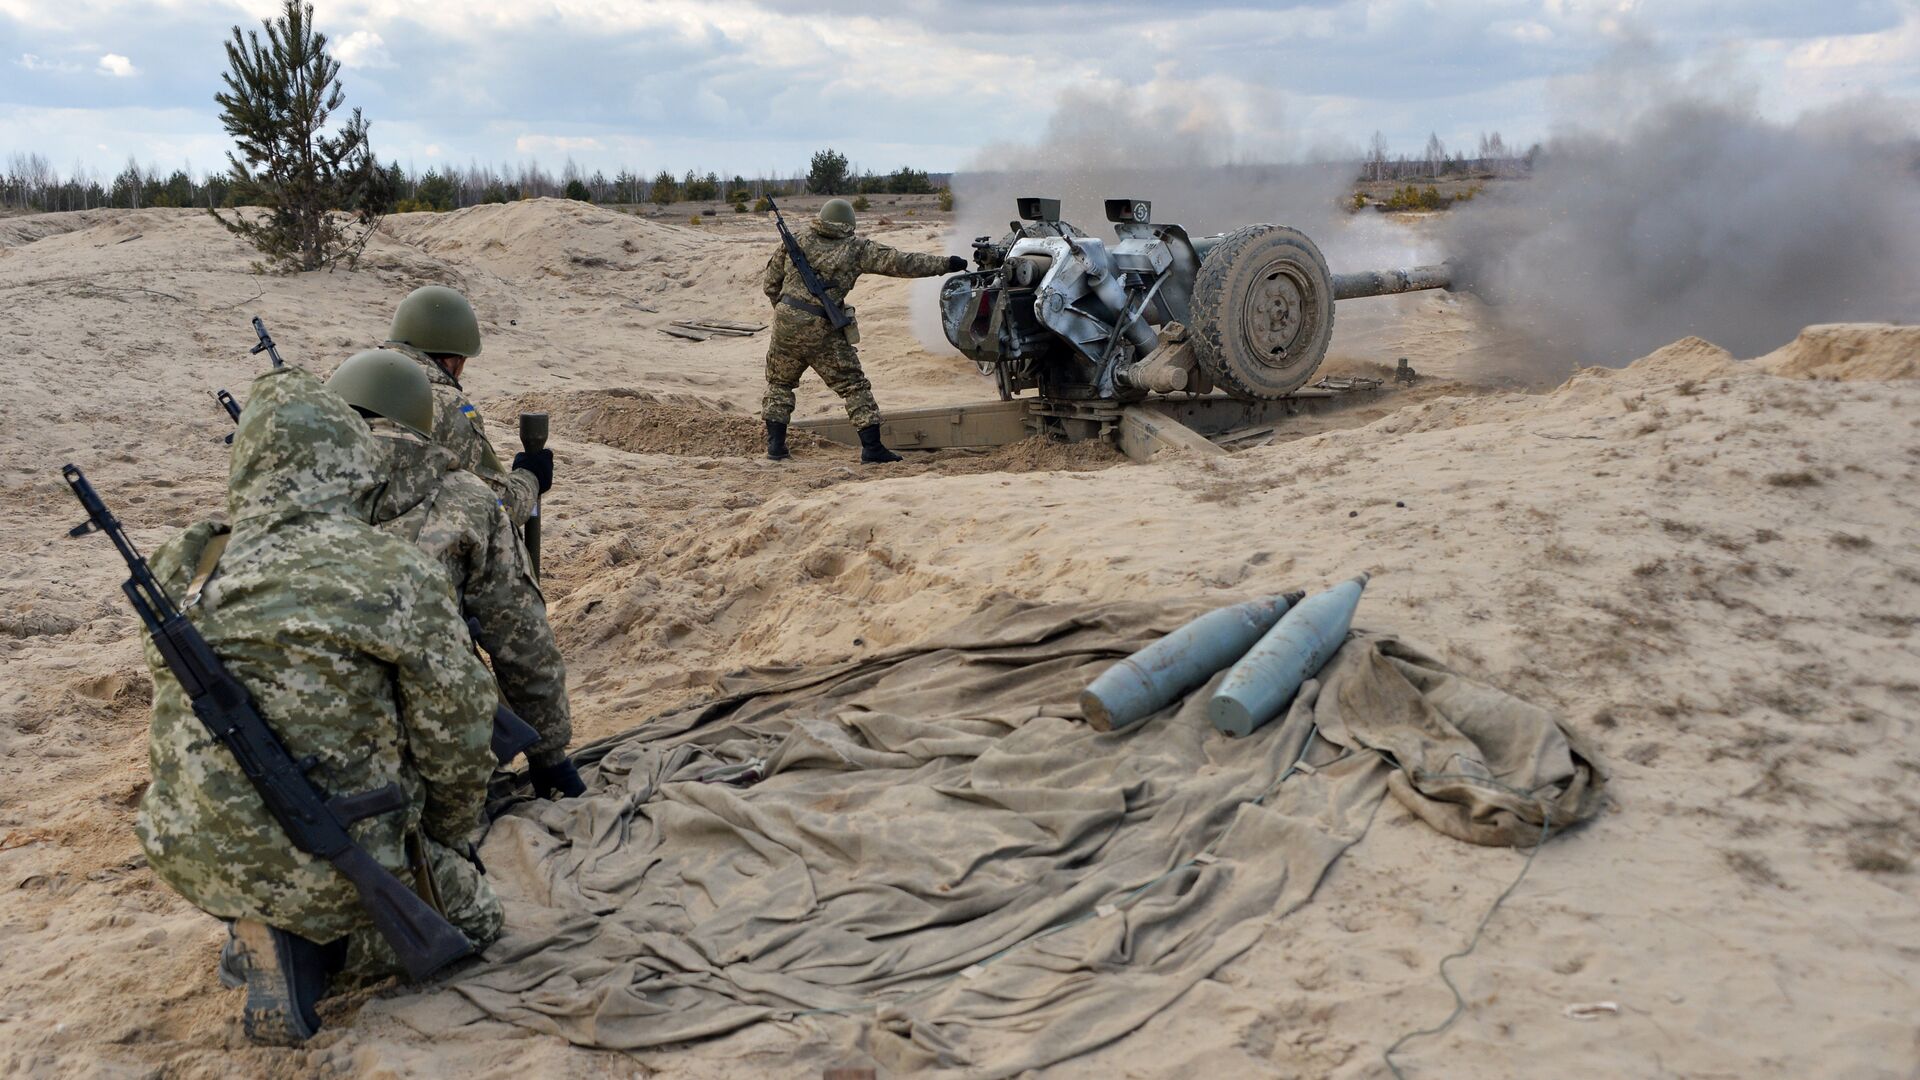 Ukrainian paratroopers fire a howitzer during military drills in the Zhytomyr region, some 150 kms from Kiev, on March 6, 2015 - Sputnik International, 1920, 27.02.2022